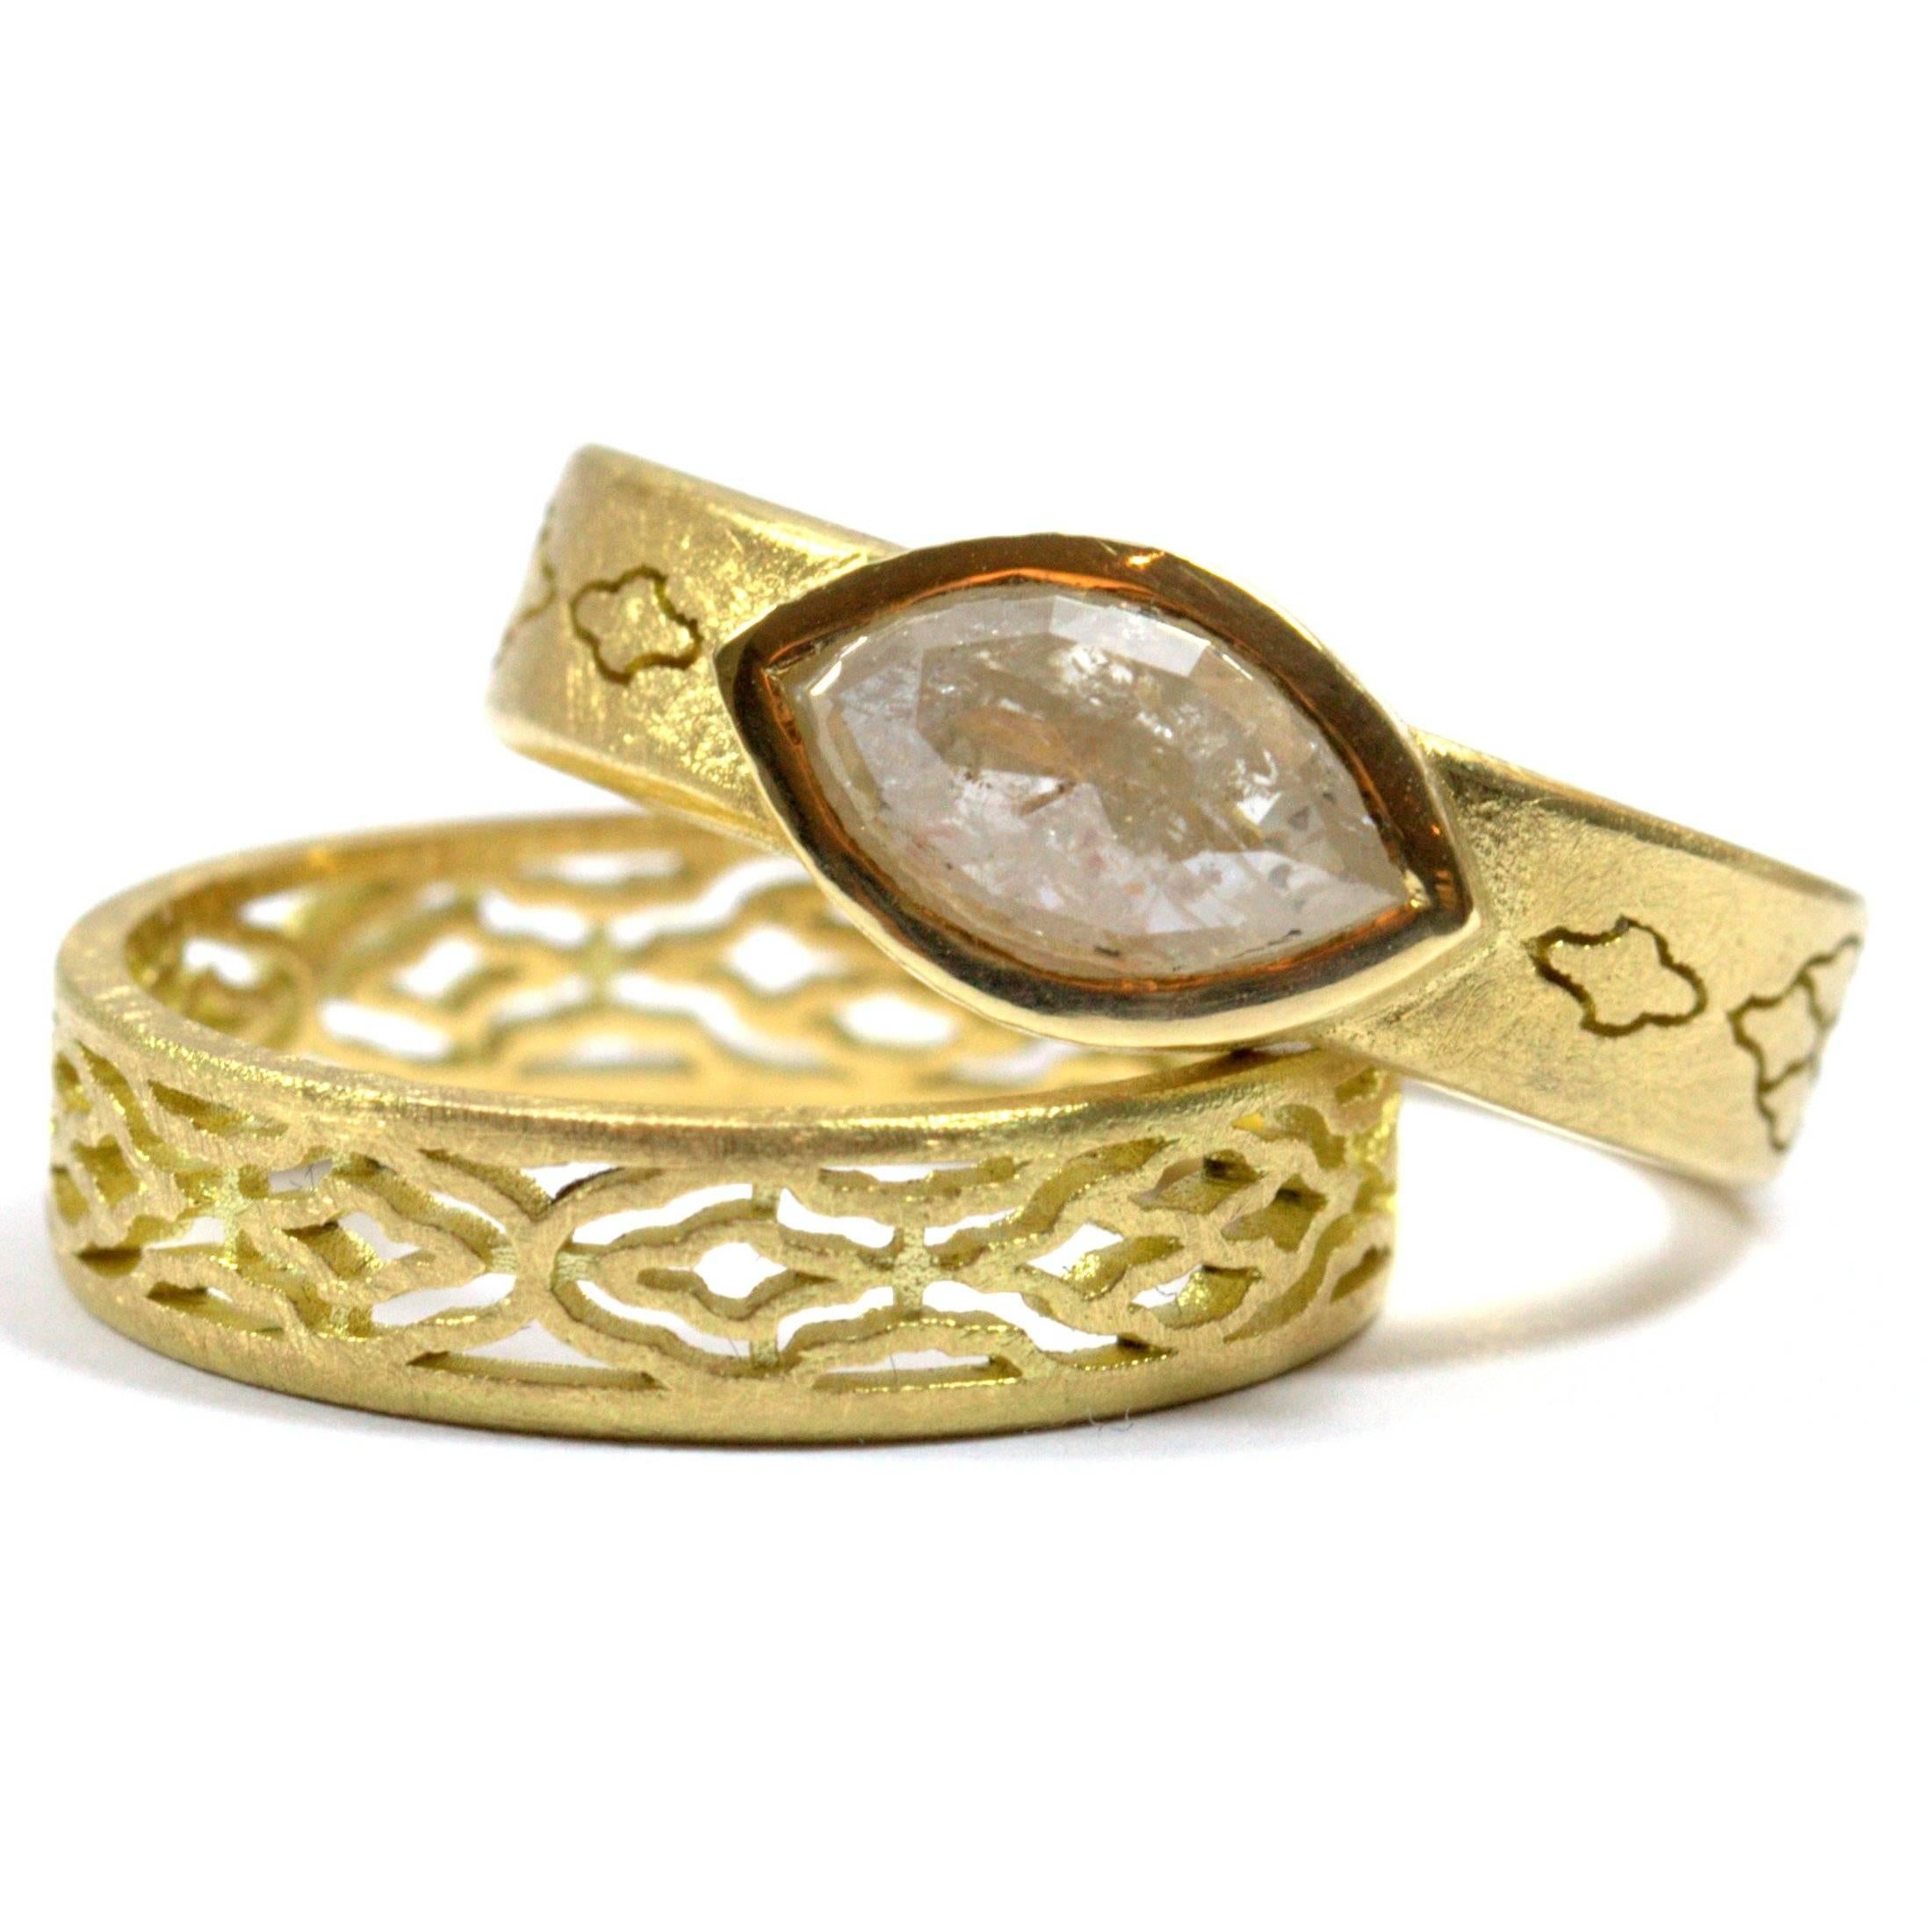 Luca Jouel Arabesque Patterned Ring in Yellow Gold In New Condition For Sale In South Perth, AU